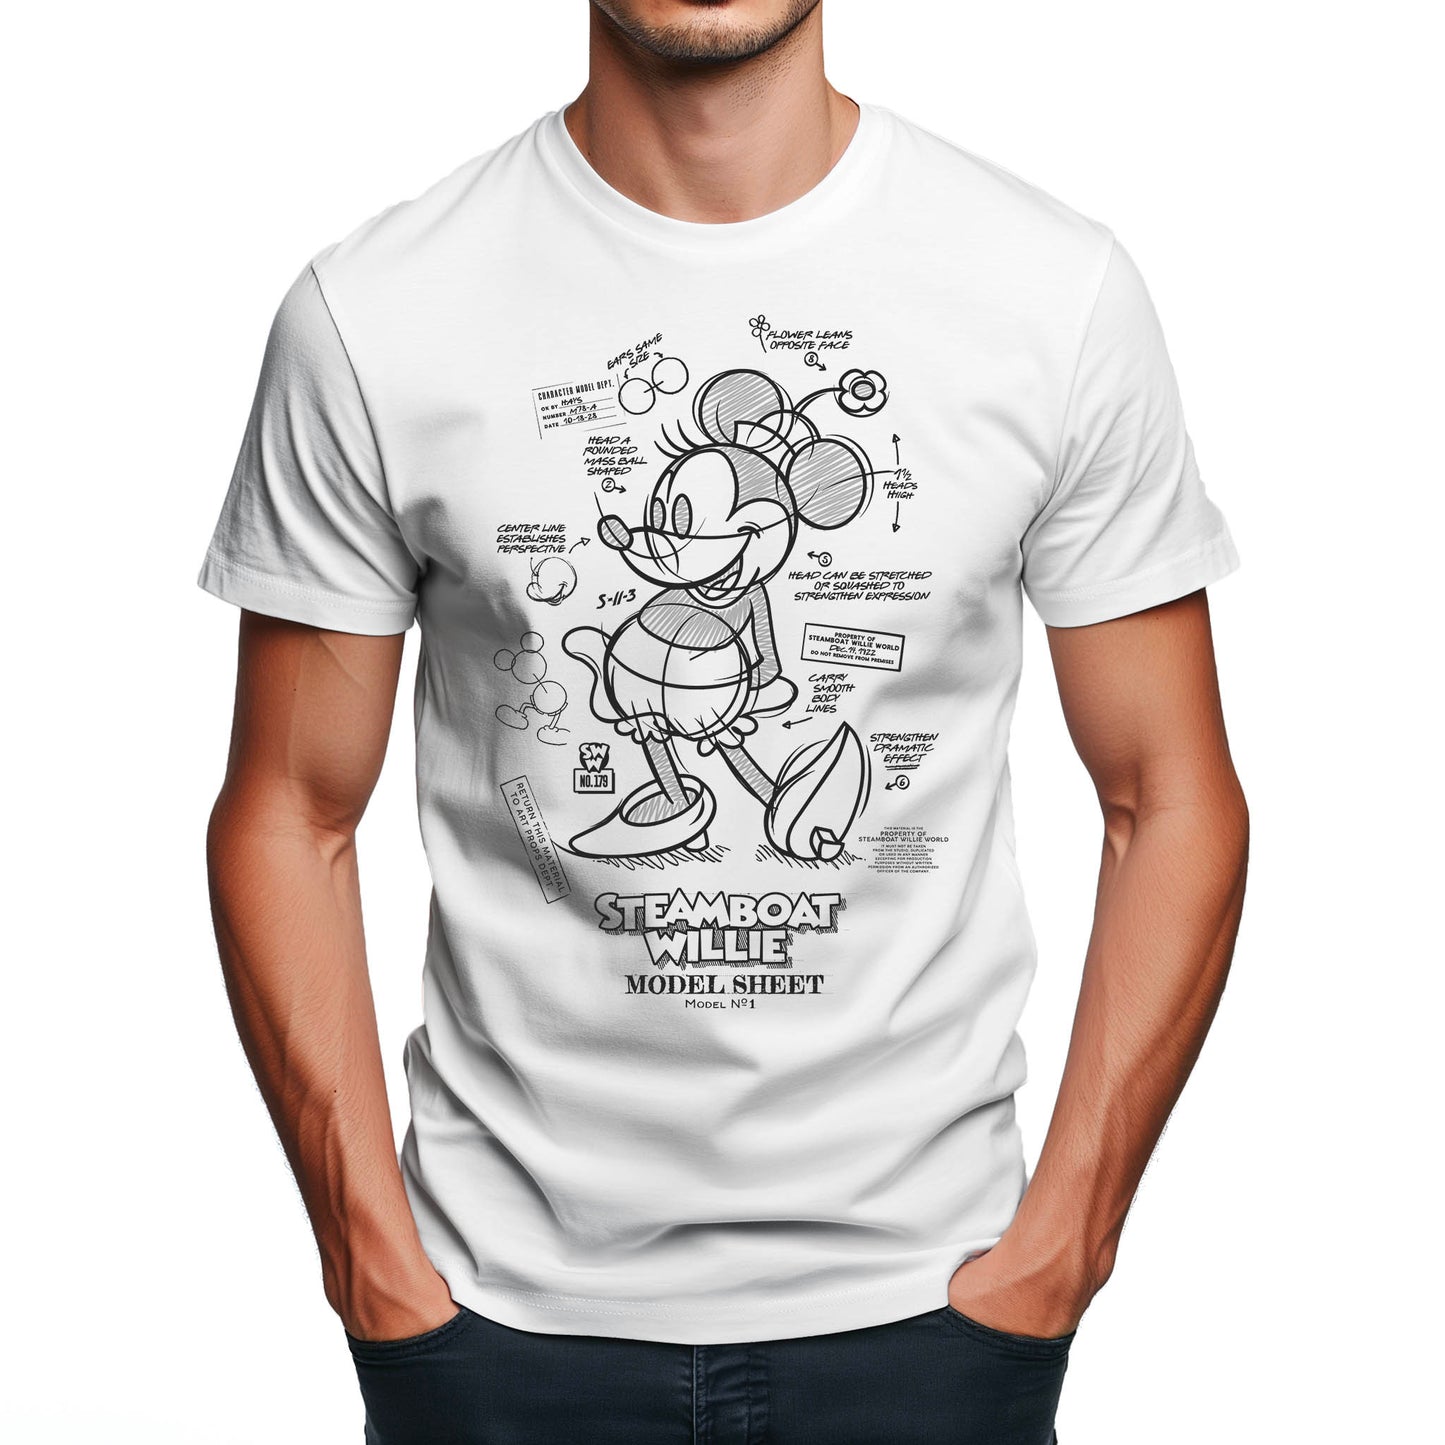 Model Material Tee - Steamboat Willie World